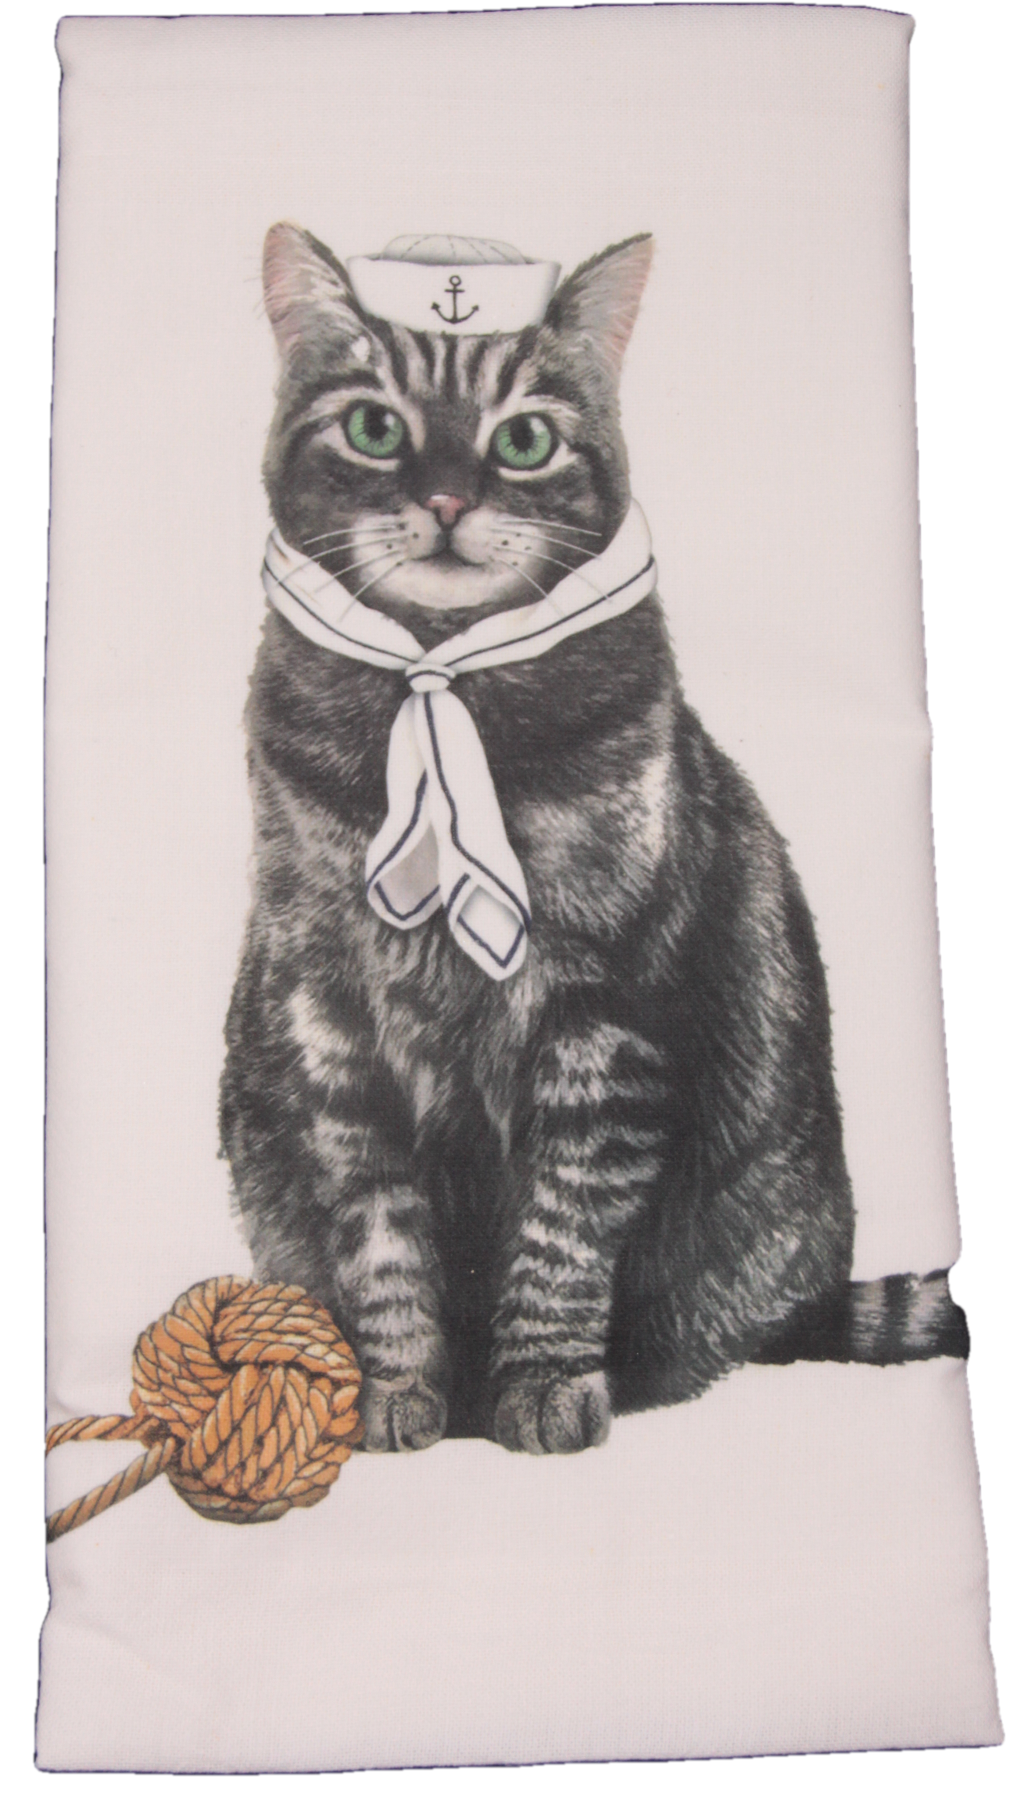 Flour Sack Towel Designed by Mary Lake Thompson CAT in CATNIP 